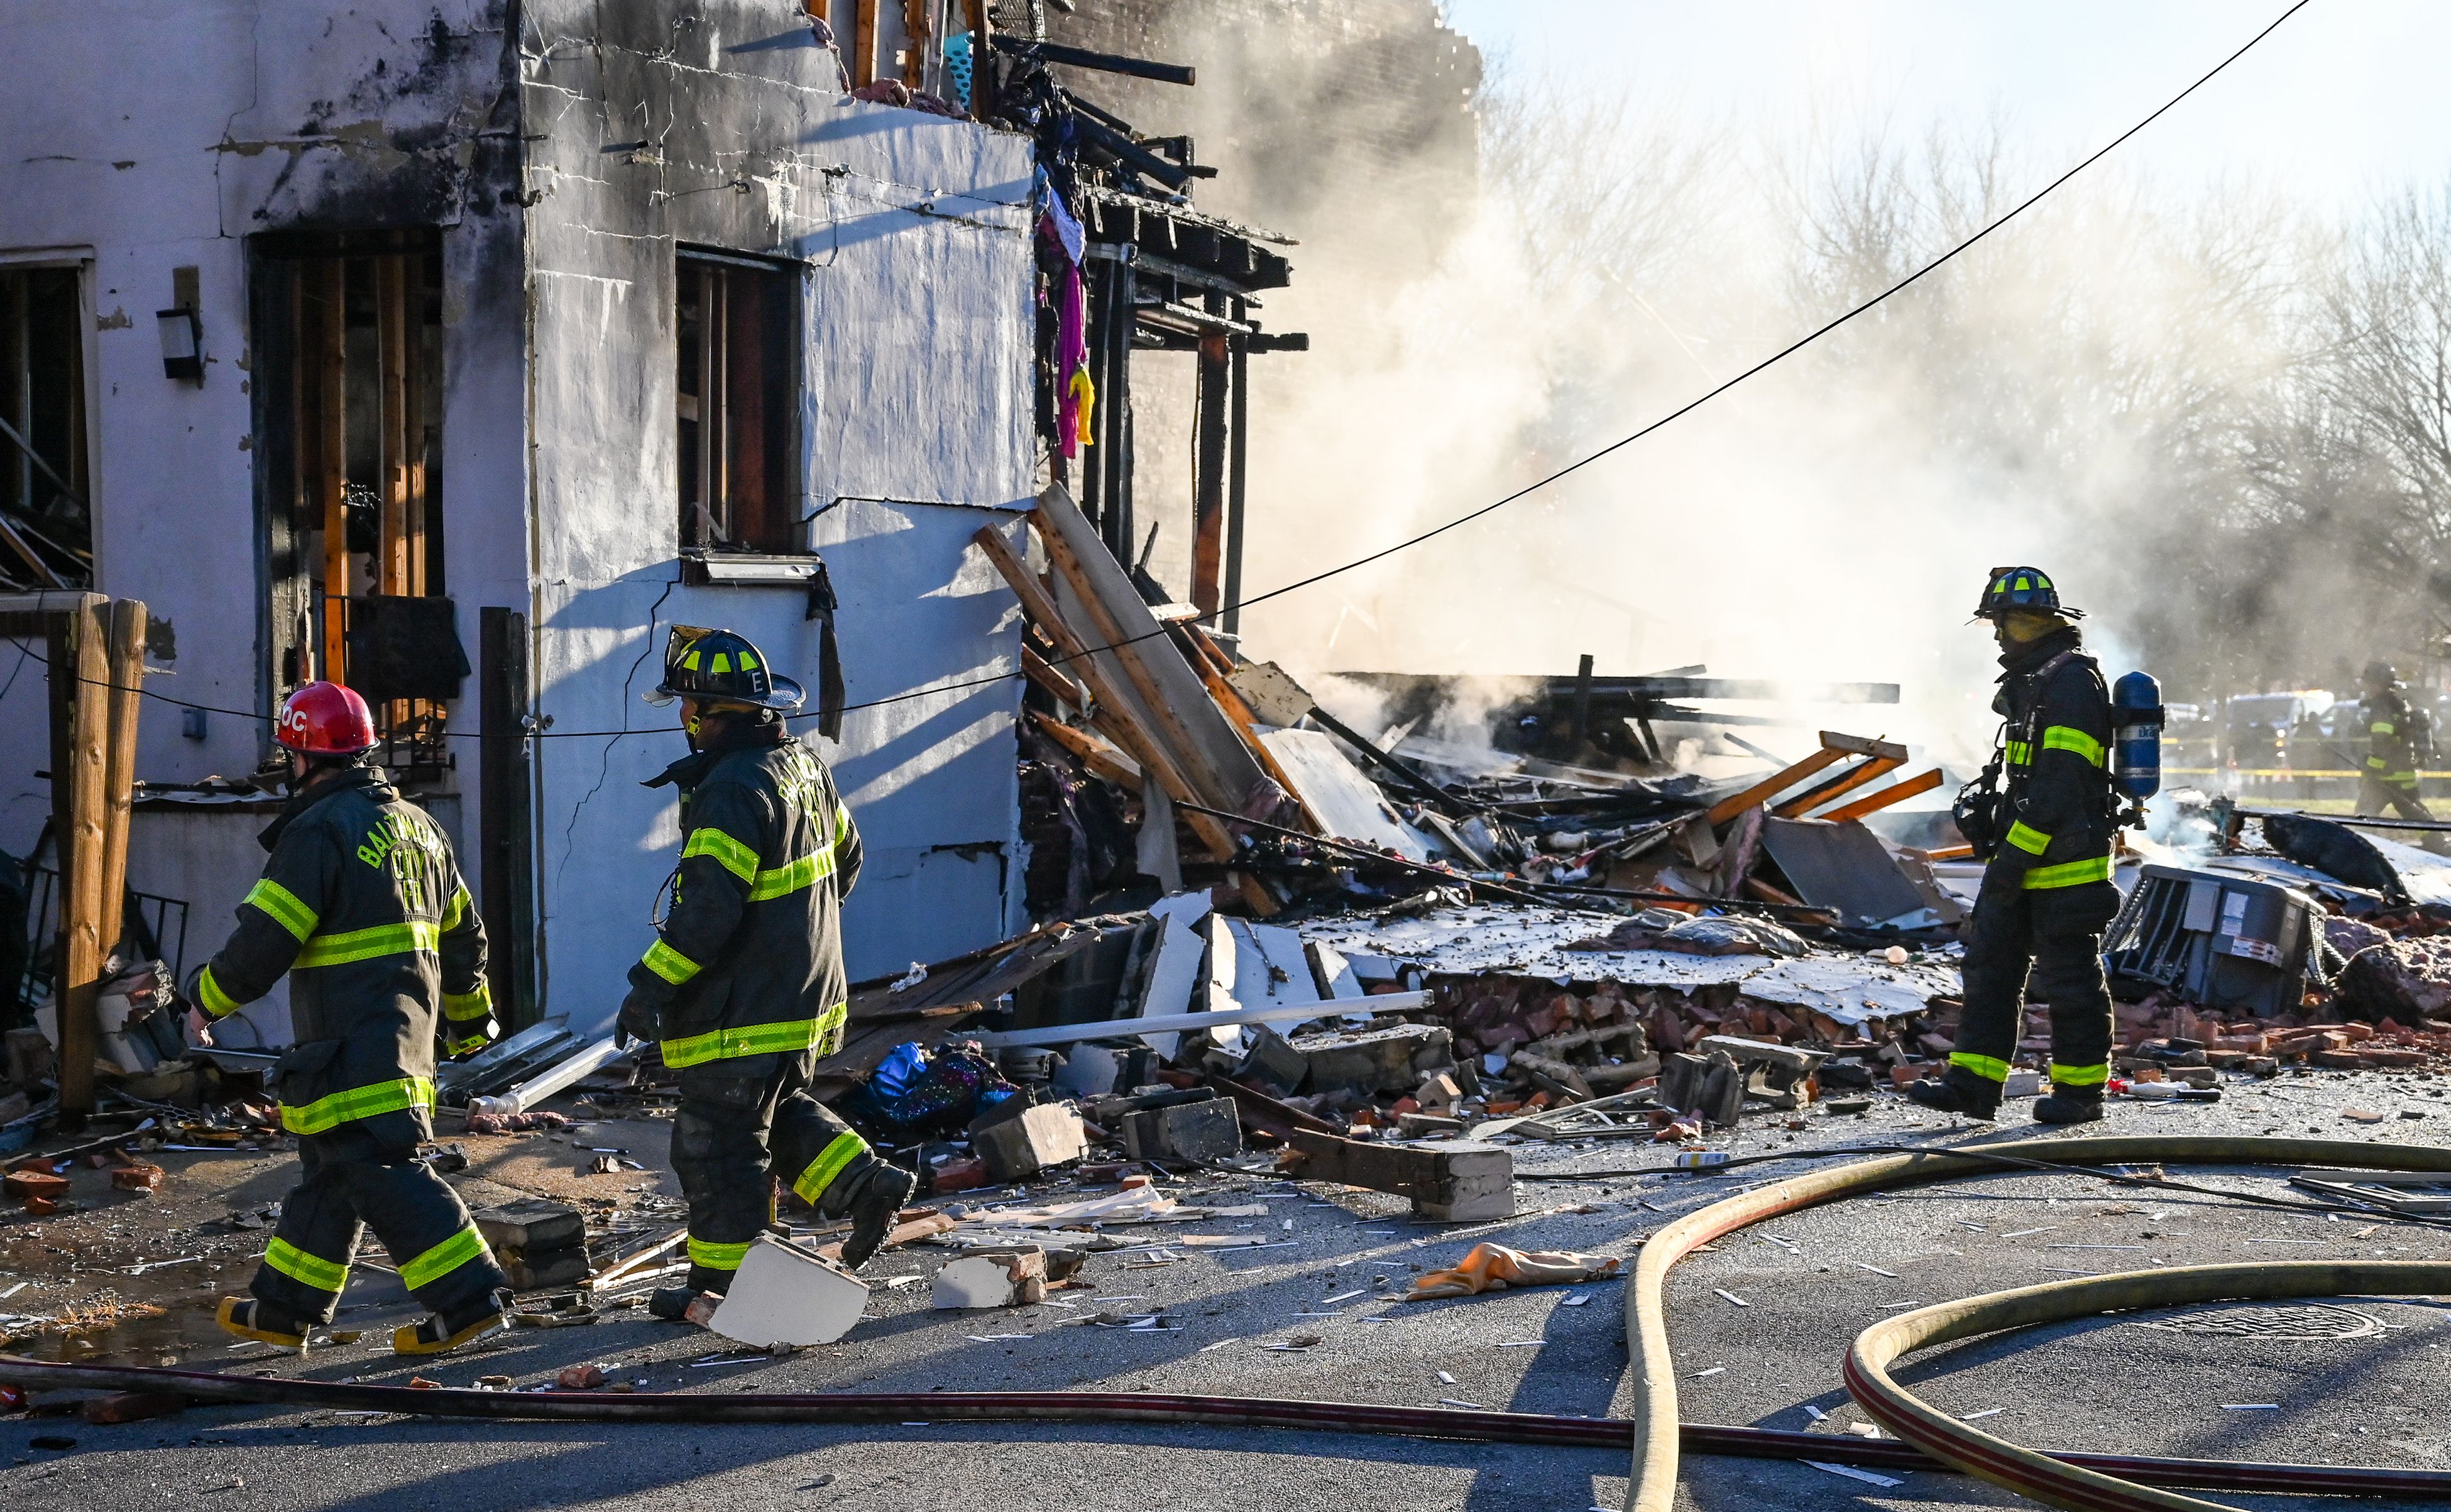 Marine vet ‘hero’ in critical condition after helping victims of Baltimore house explosion